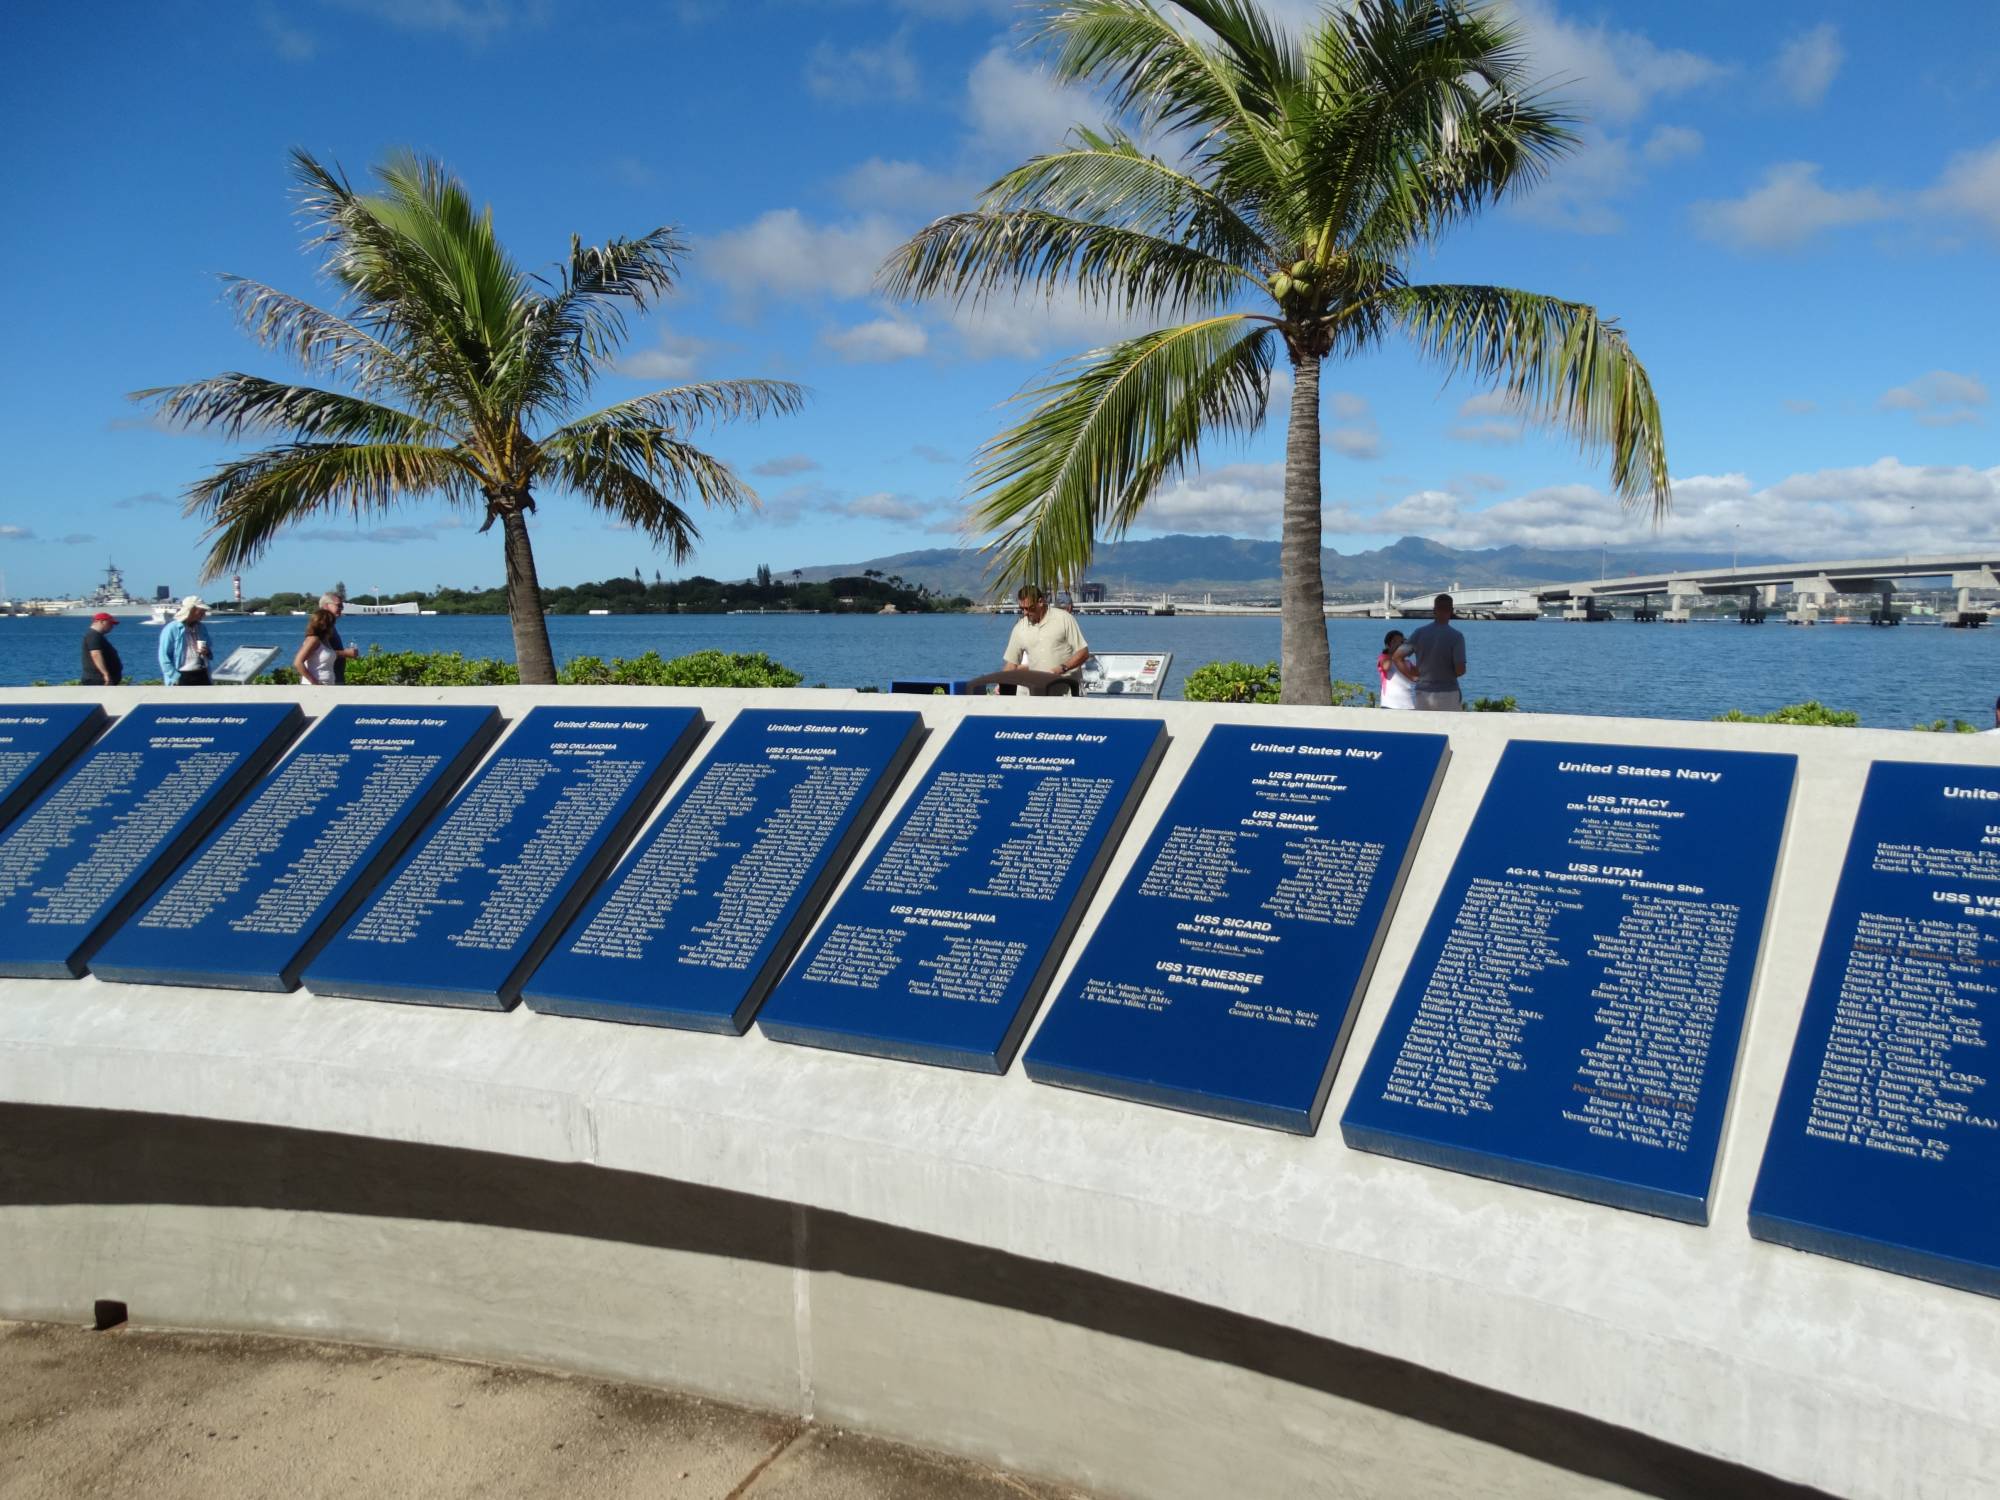 Visit the Pearl Harbor Memorial while staying at Aulani | PassPorter.com